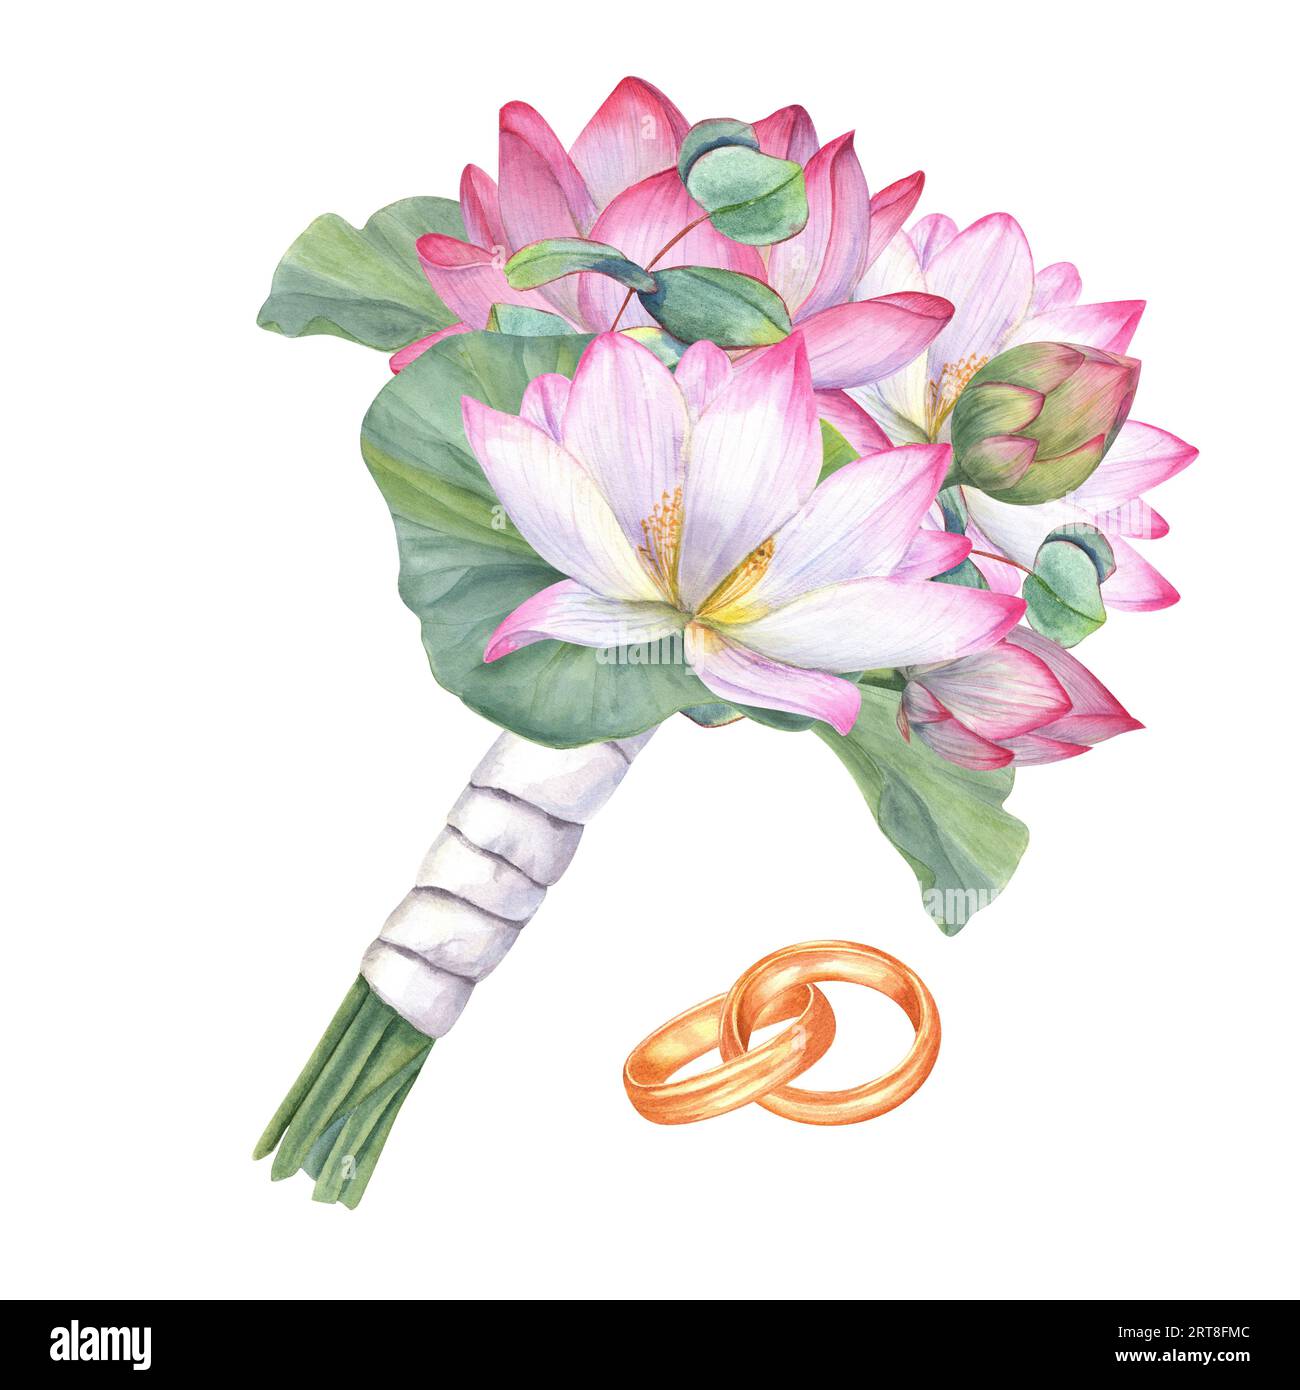 Wedding bouquet with white pink lotuses and eucalyptus. Blooming water lily, buds, green leaves, gold rings. Lovely boutonniere with satin ribbon. Stock Photo